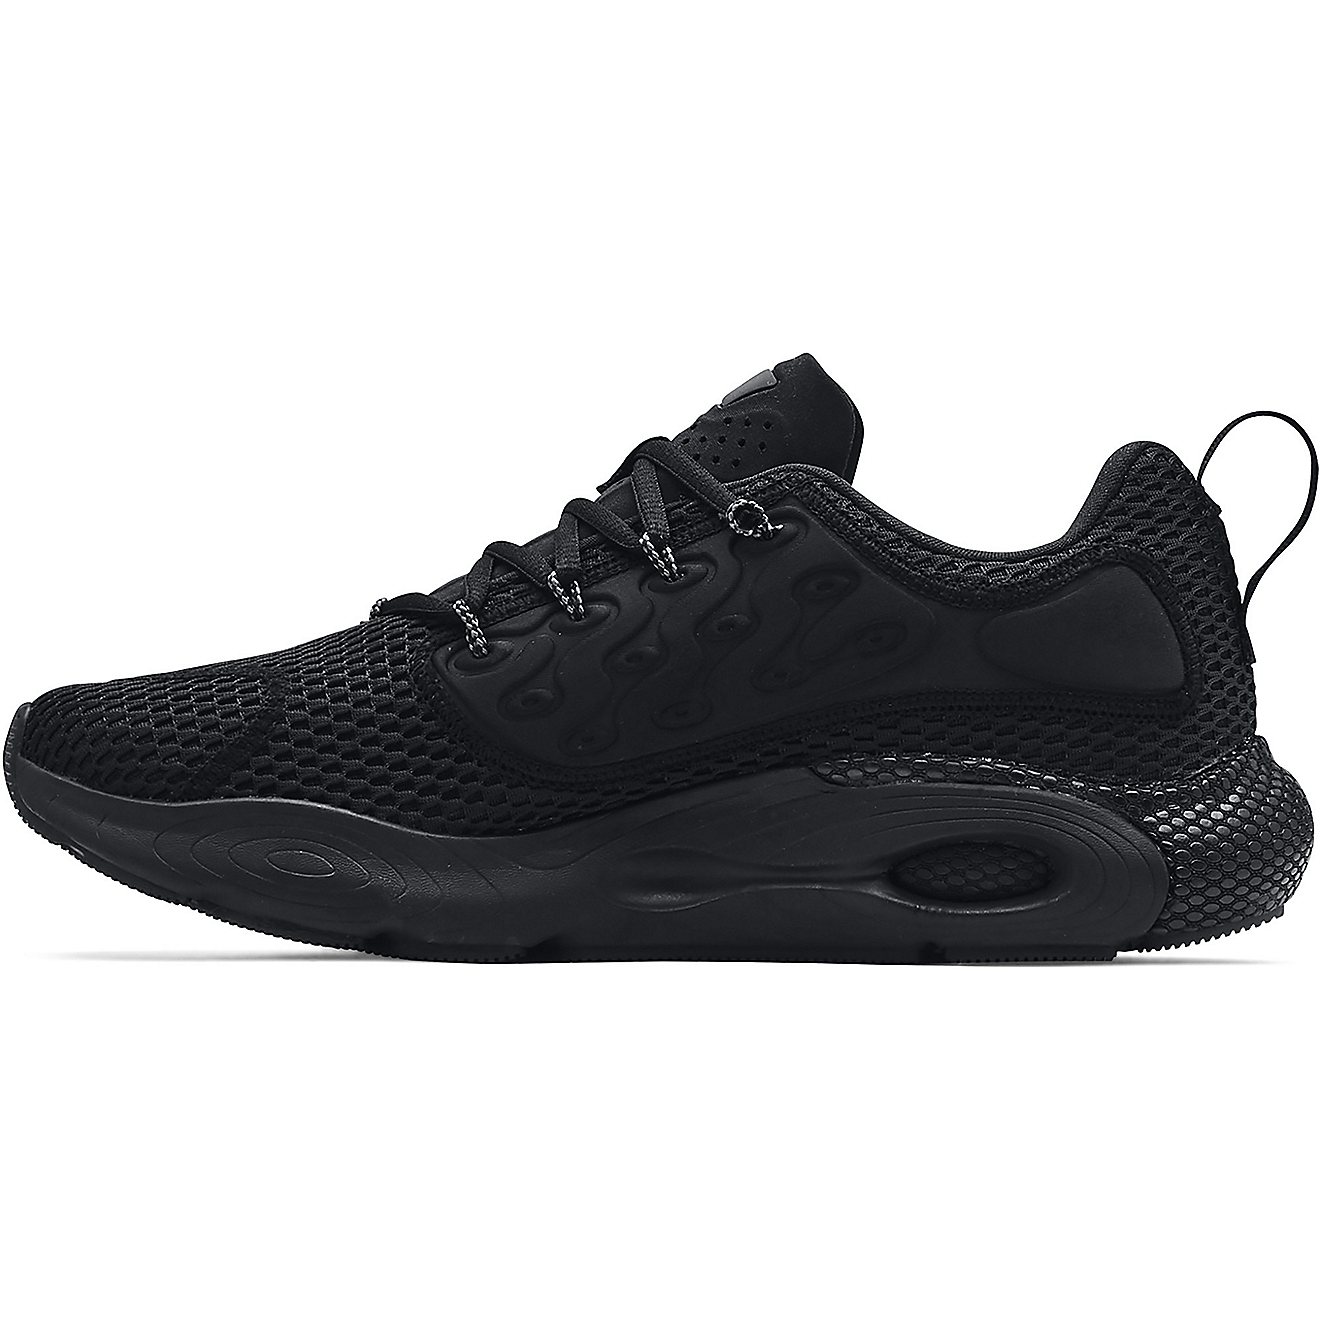 Under Armour Men's HOVR™ Revenant Sportstyle Shoes                                                                             - view number 3